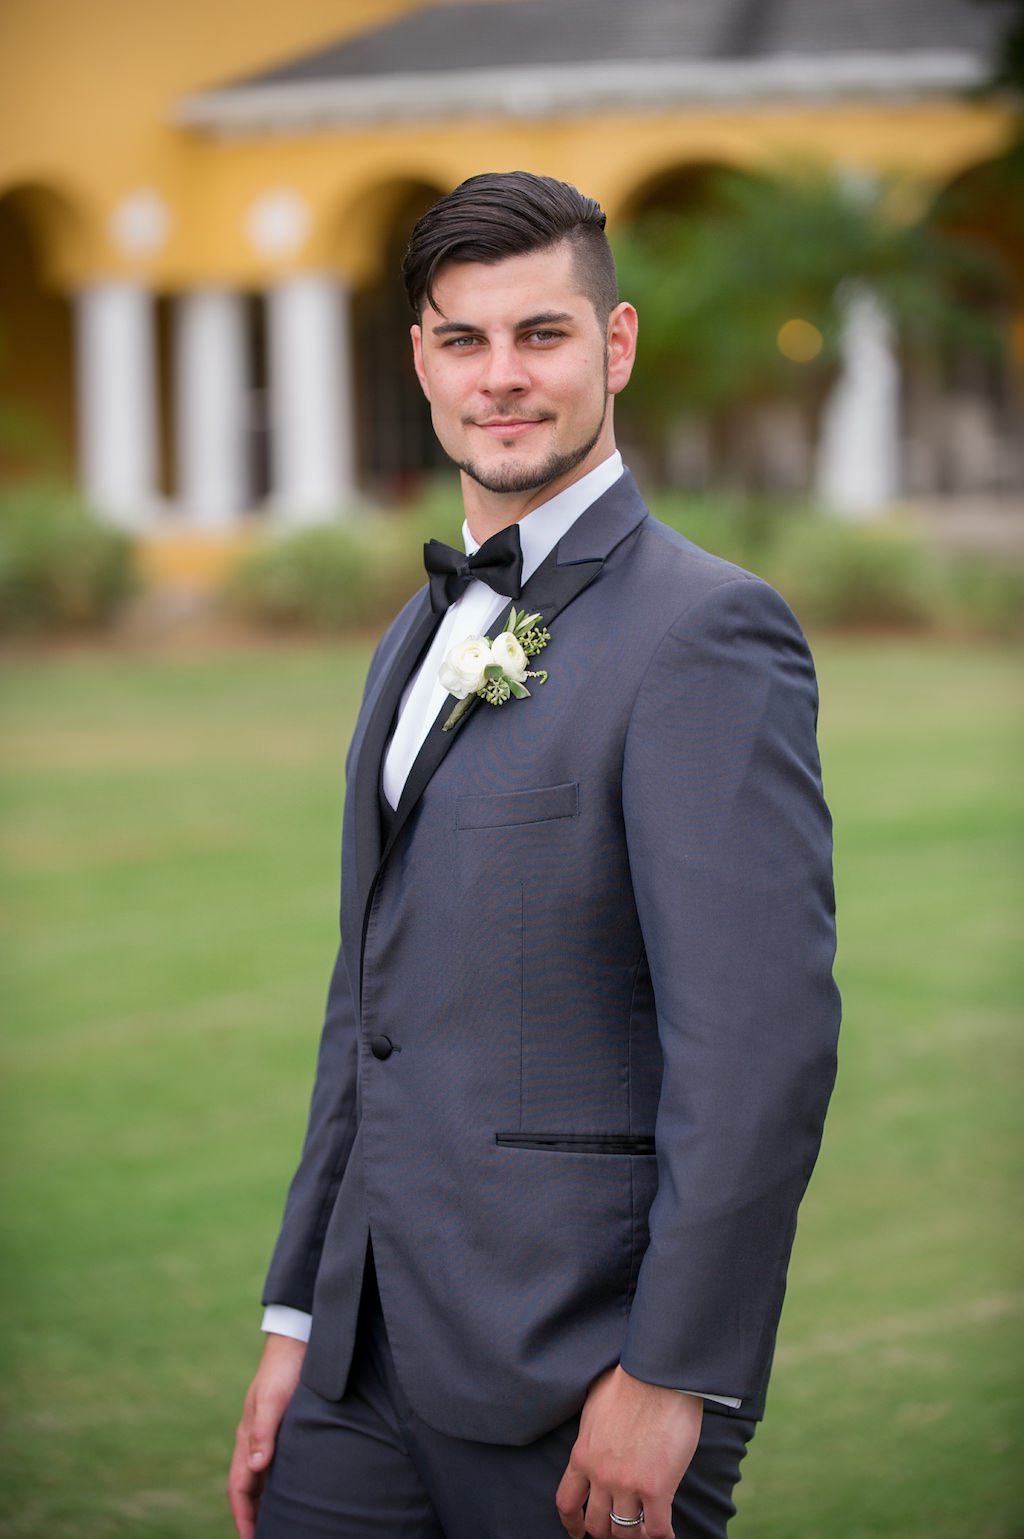 Outdoor Garden Groom Portrait wearing Gray Tuxedo with White Rose and Greenery Boutonnière | Tampa Bay Wedding Photographer Andi Diamond Photography